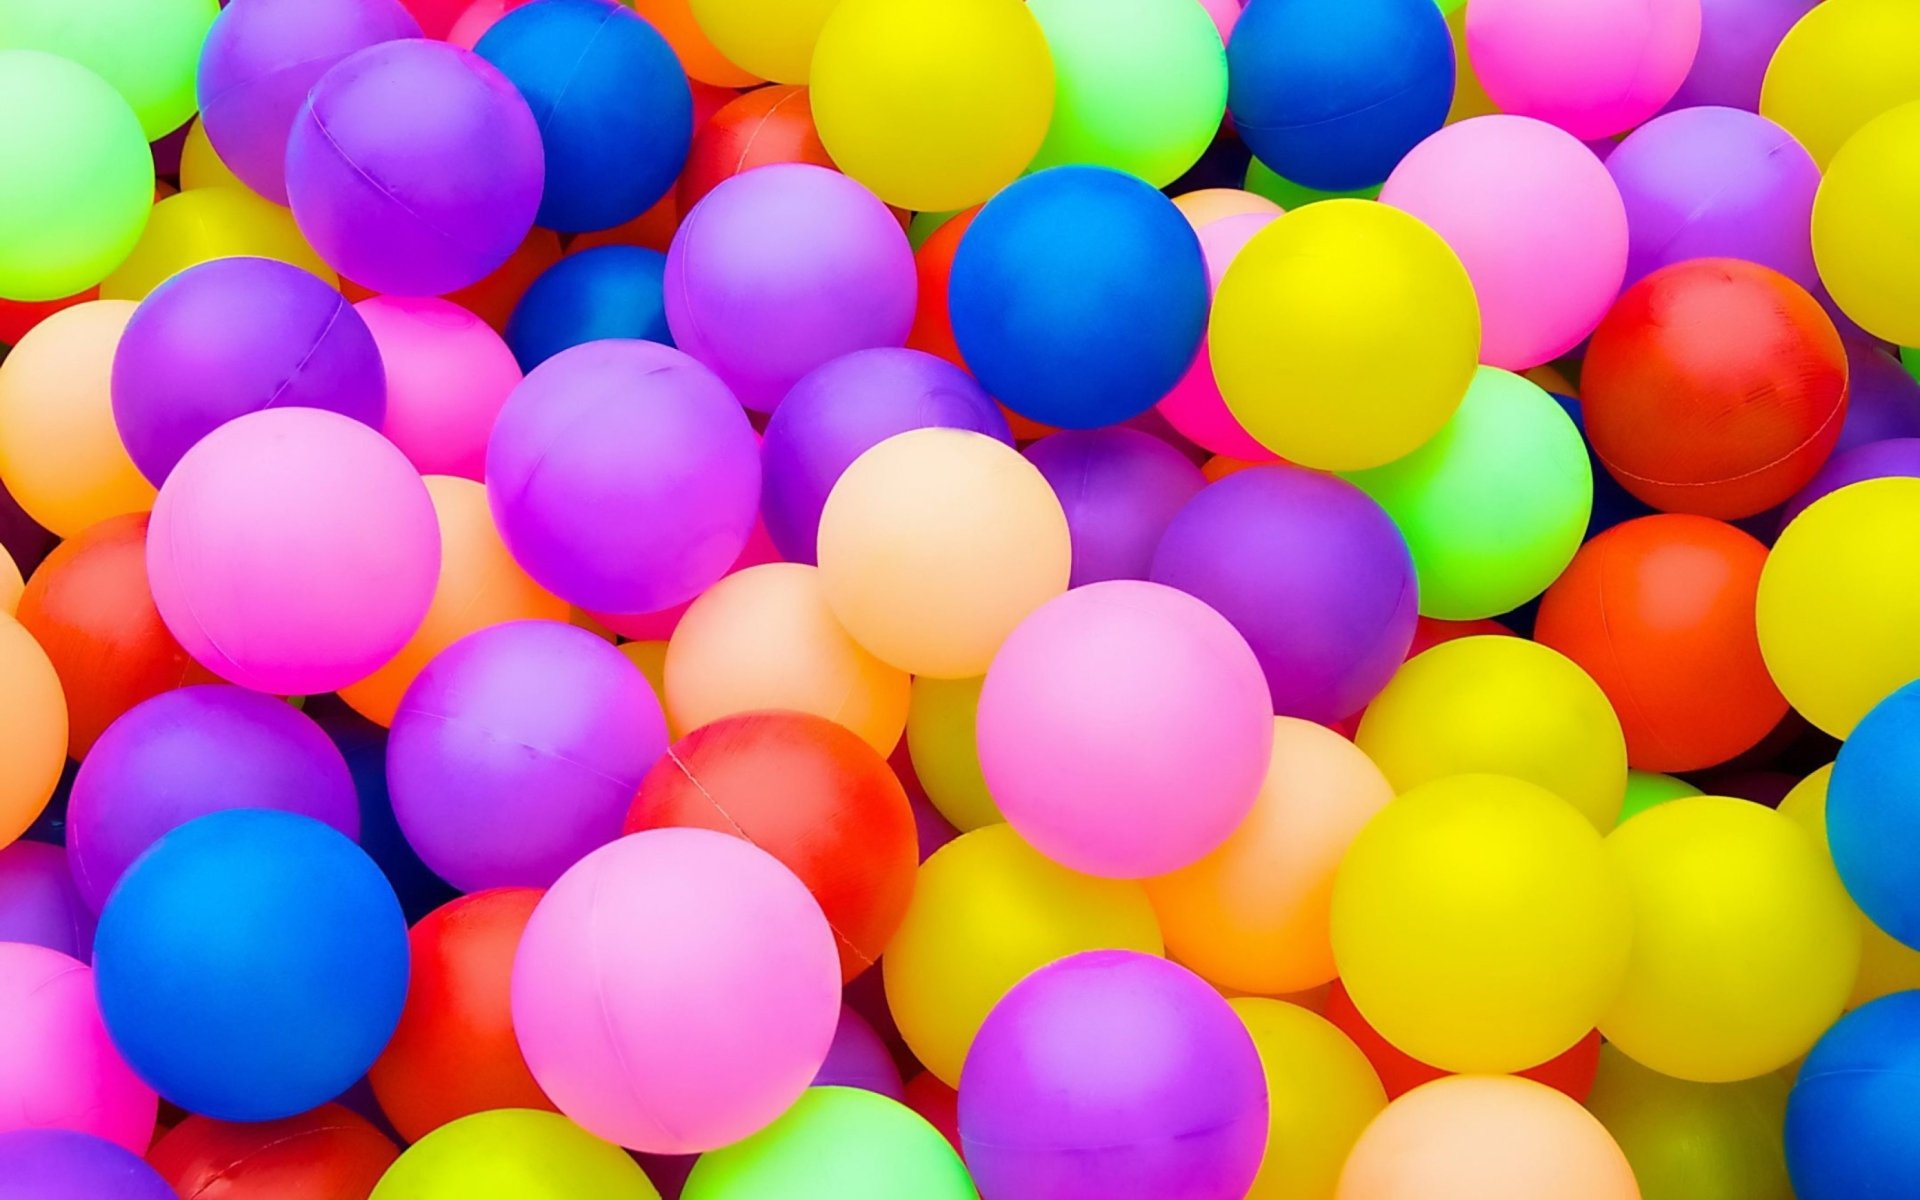 Colorful Balloons Background